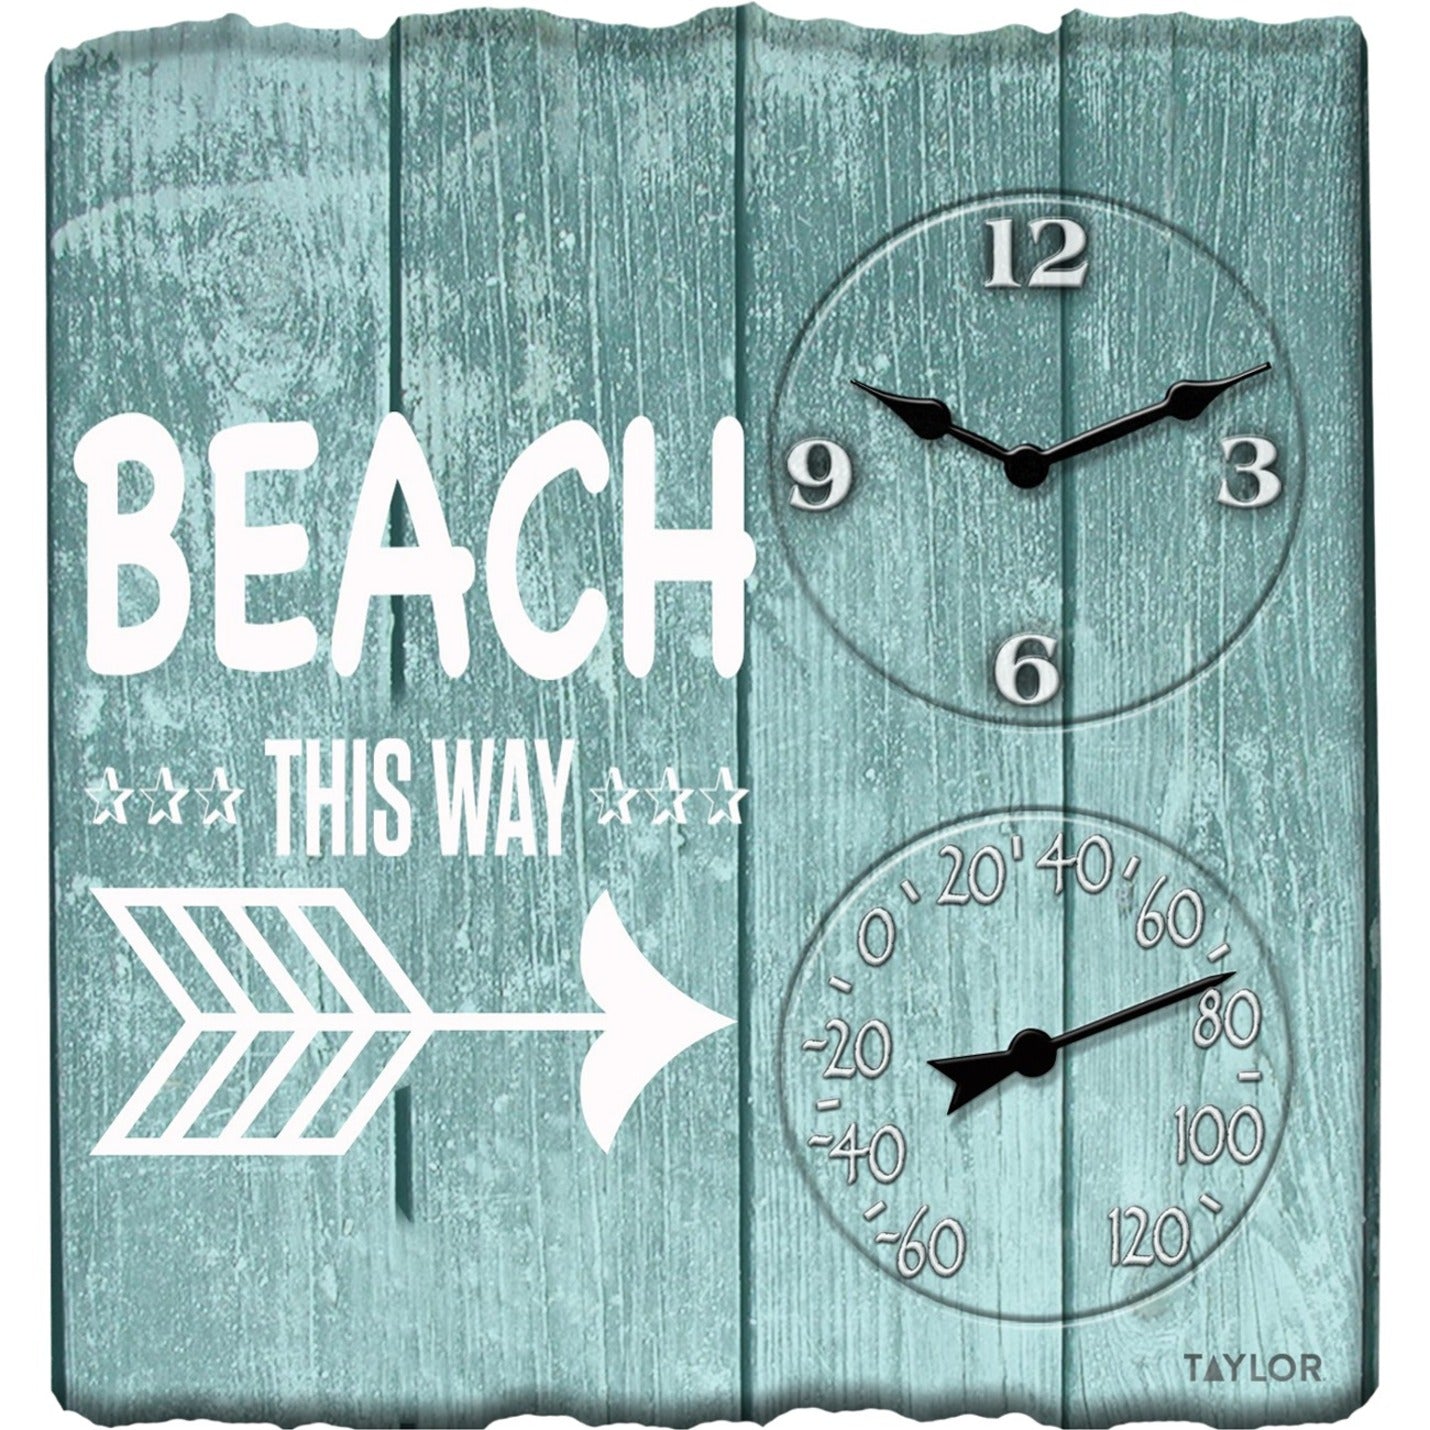 Taylor 92685T Beach This Way Clock with Thermometer, 14-Inch x 14-Inch